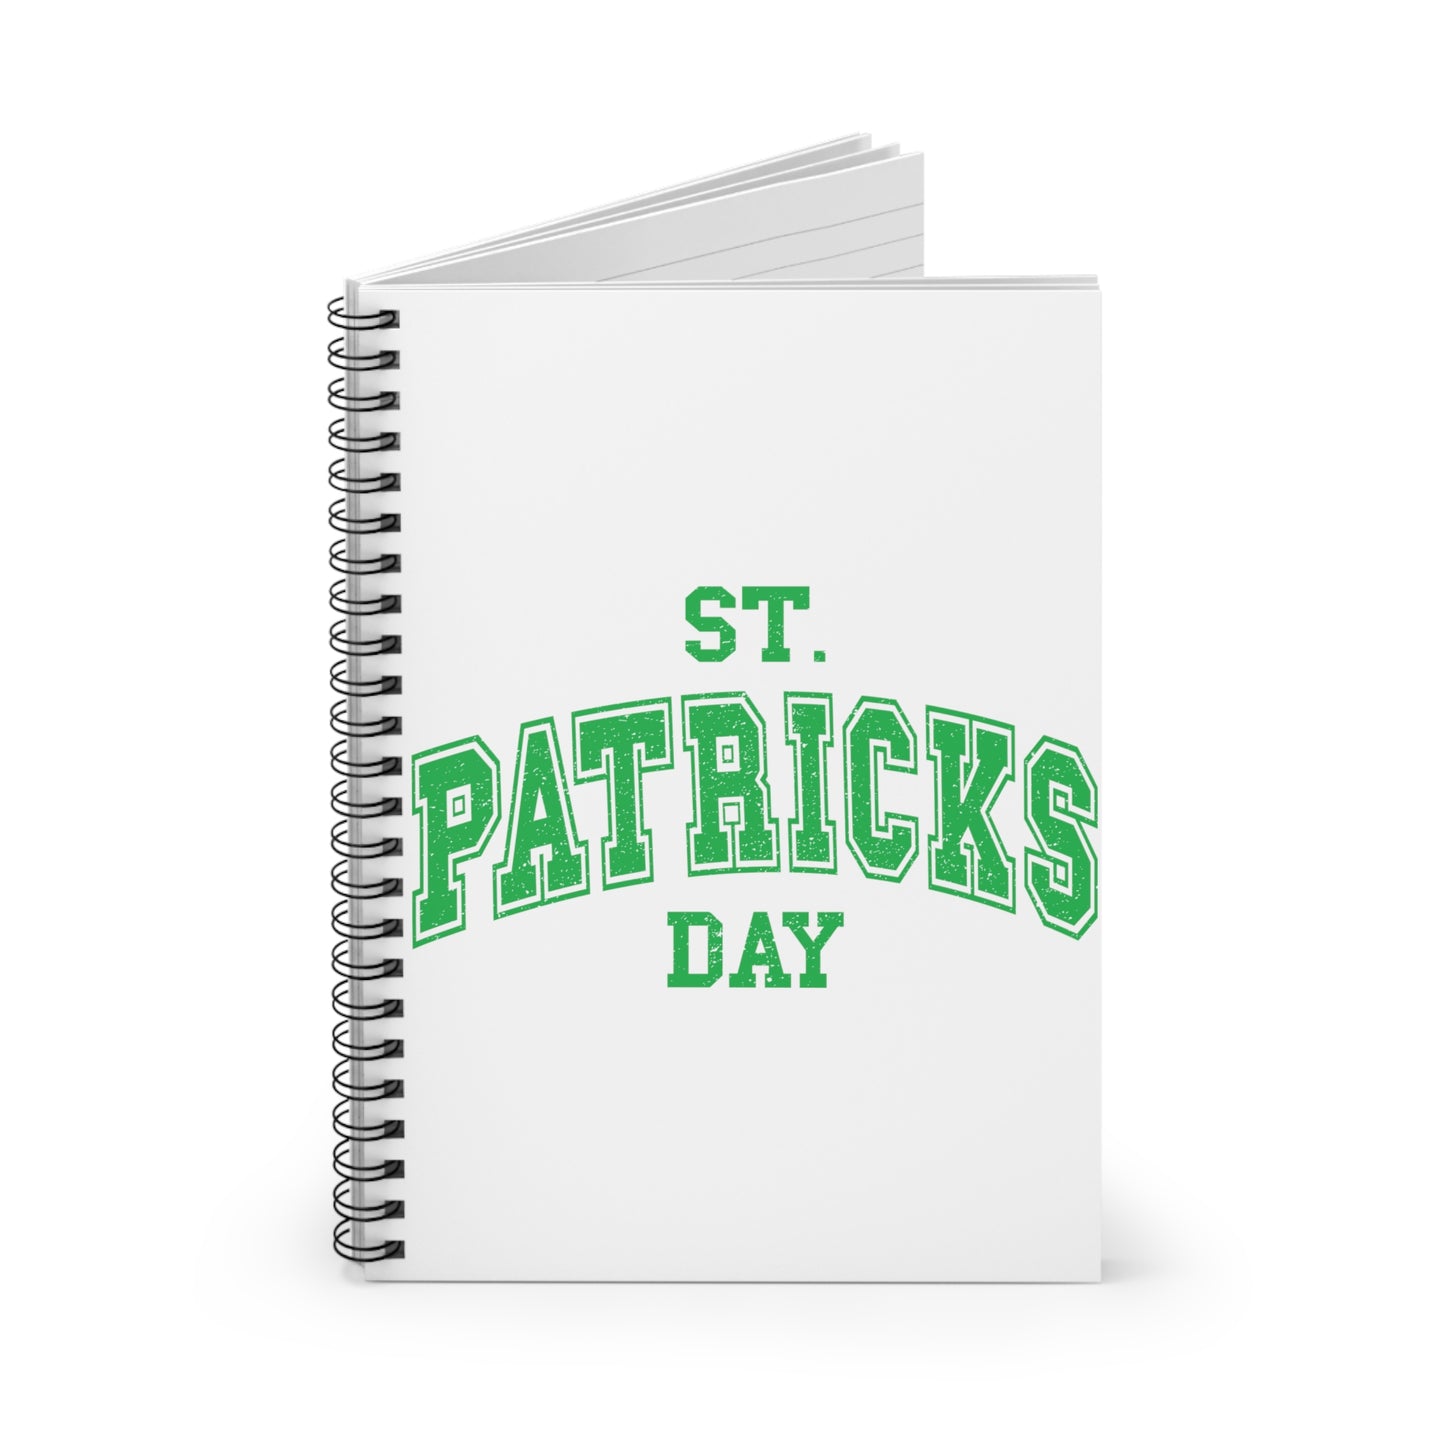 St. Patrick's Day: Spiral Notebook - Log Books - Journals - Diaries - and More Custom Printed by TheGlassyLass.com